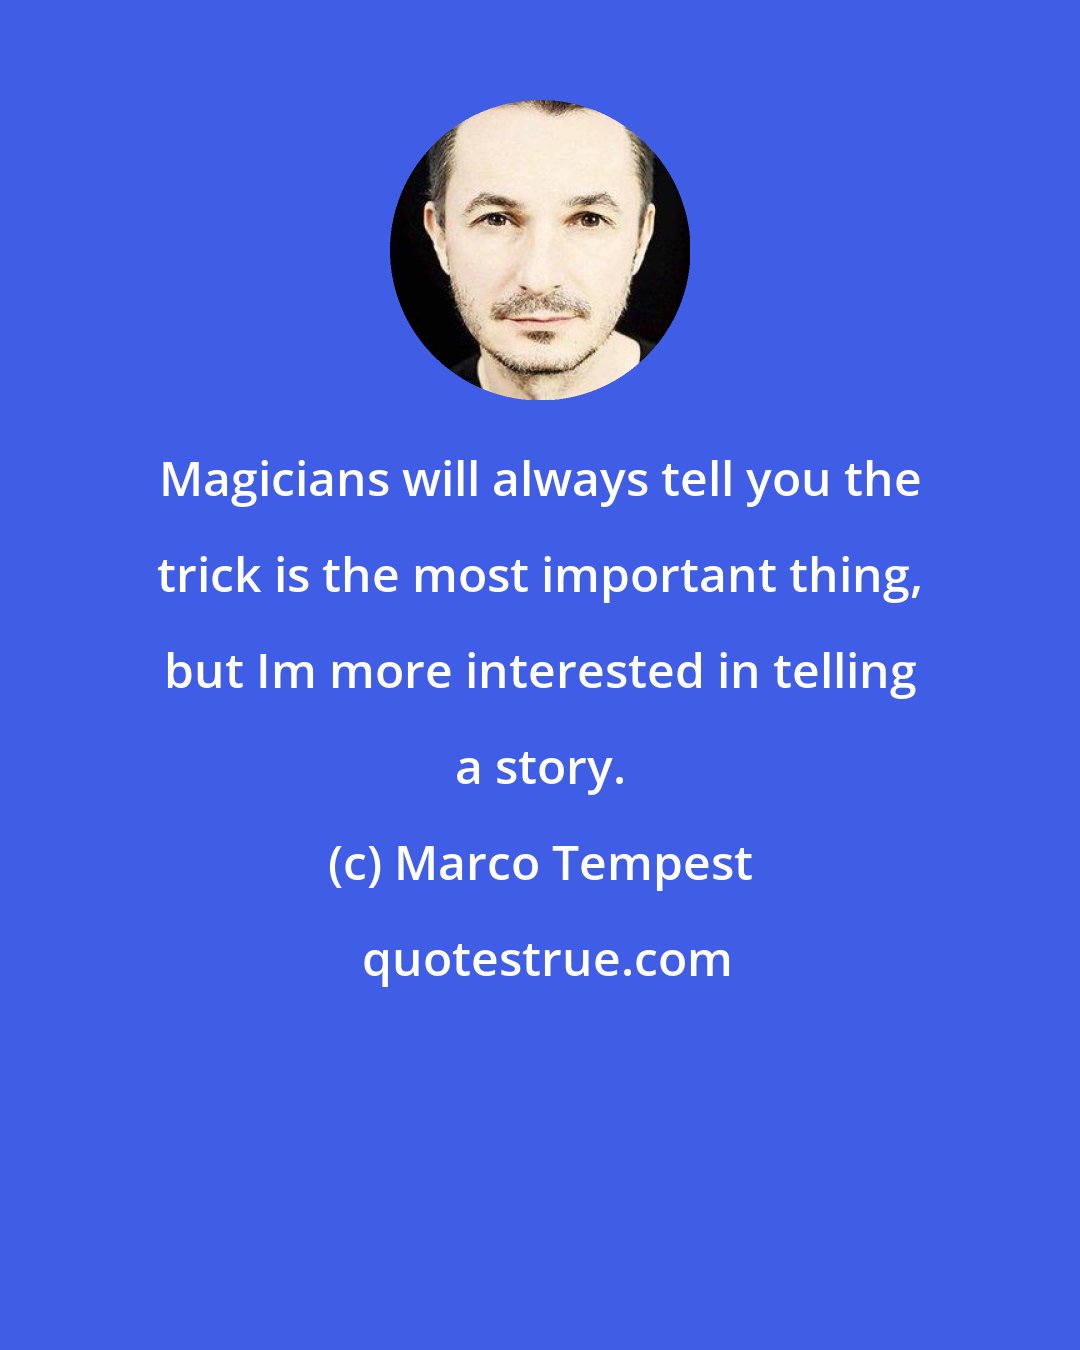 Marco Tempest: Magicians will always tell you the trick is the most important thing, but Im more interested in telling a story.